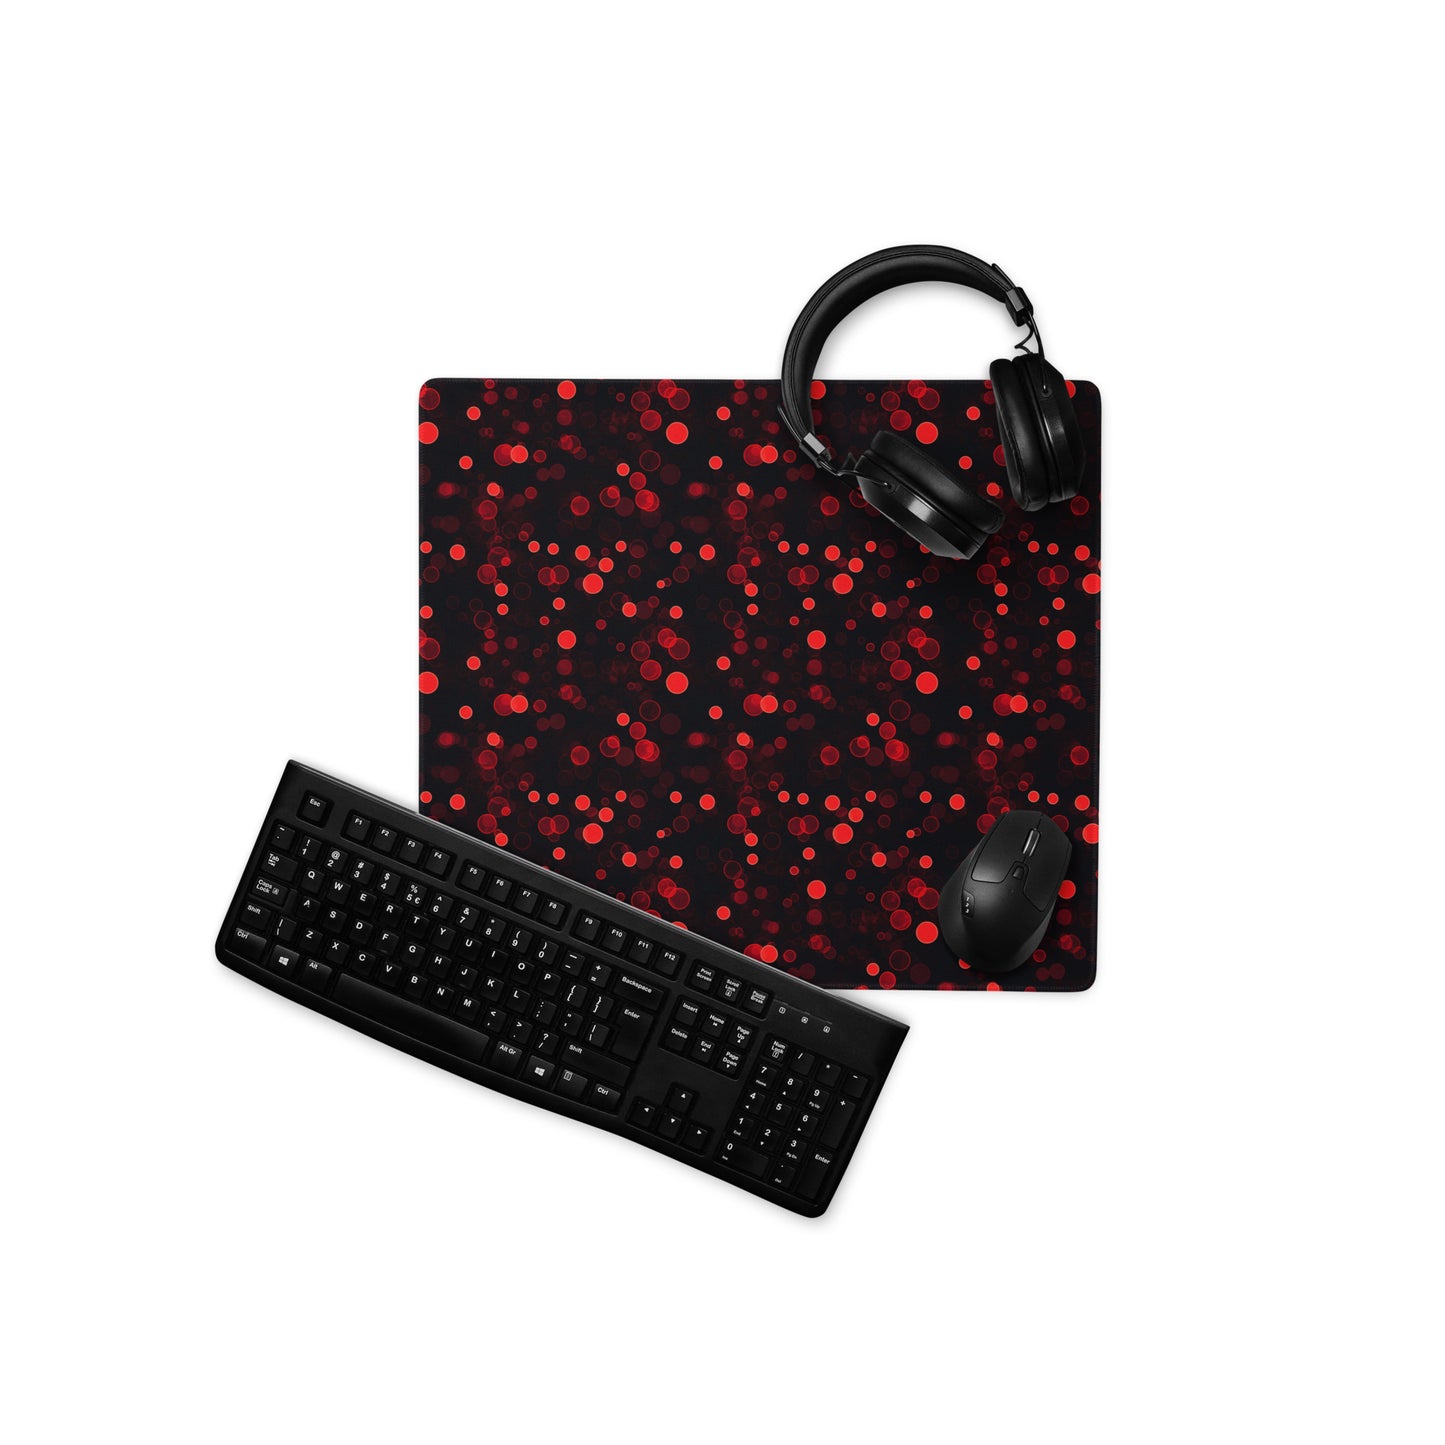 A 18" x 16" desk pad with red polka dots. With a keyboard, mouse, and headphones sitting on it.